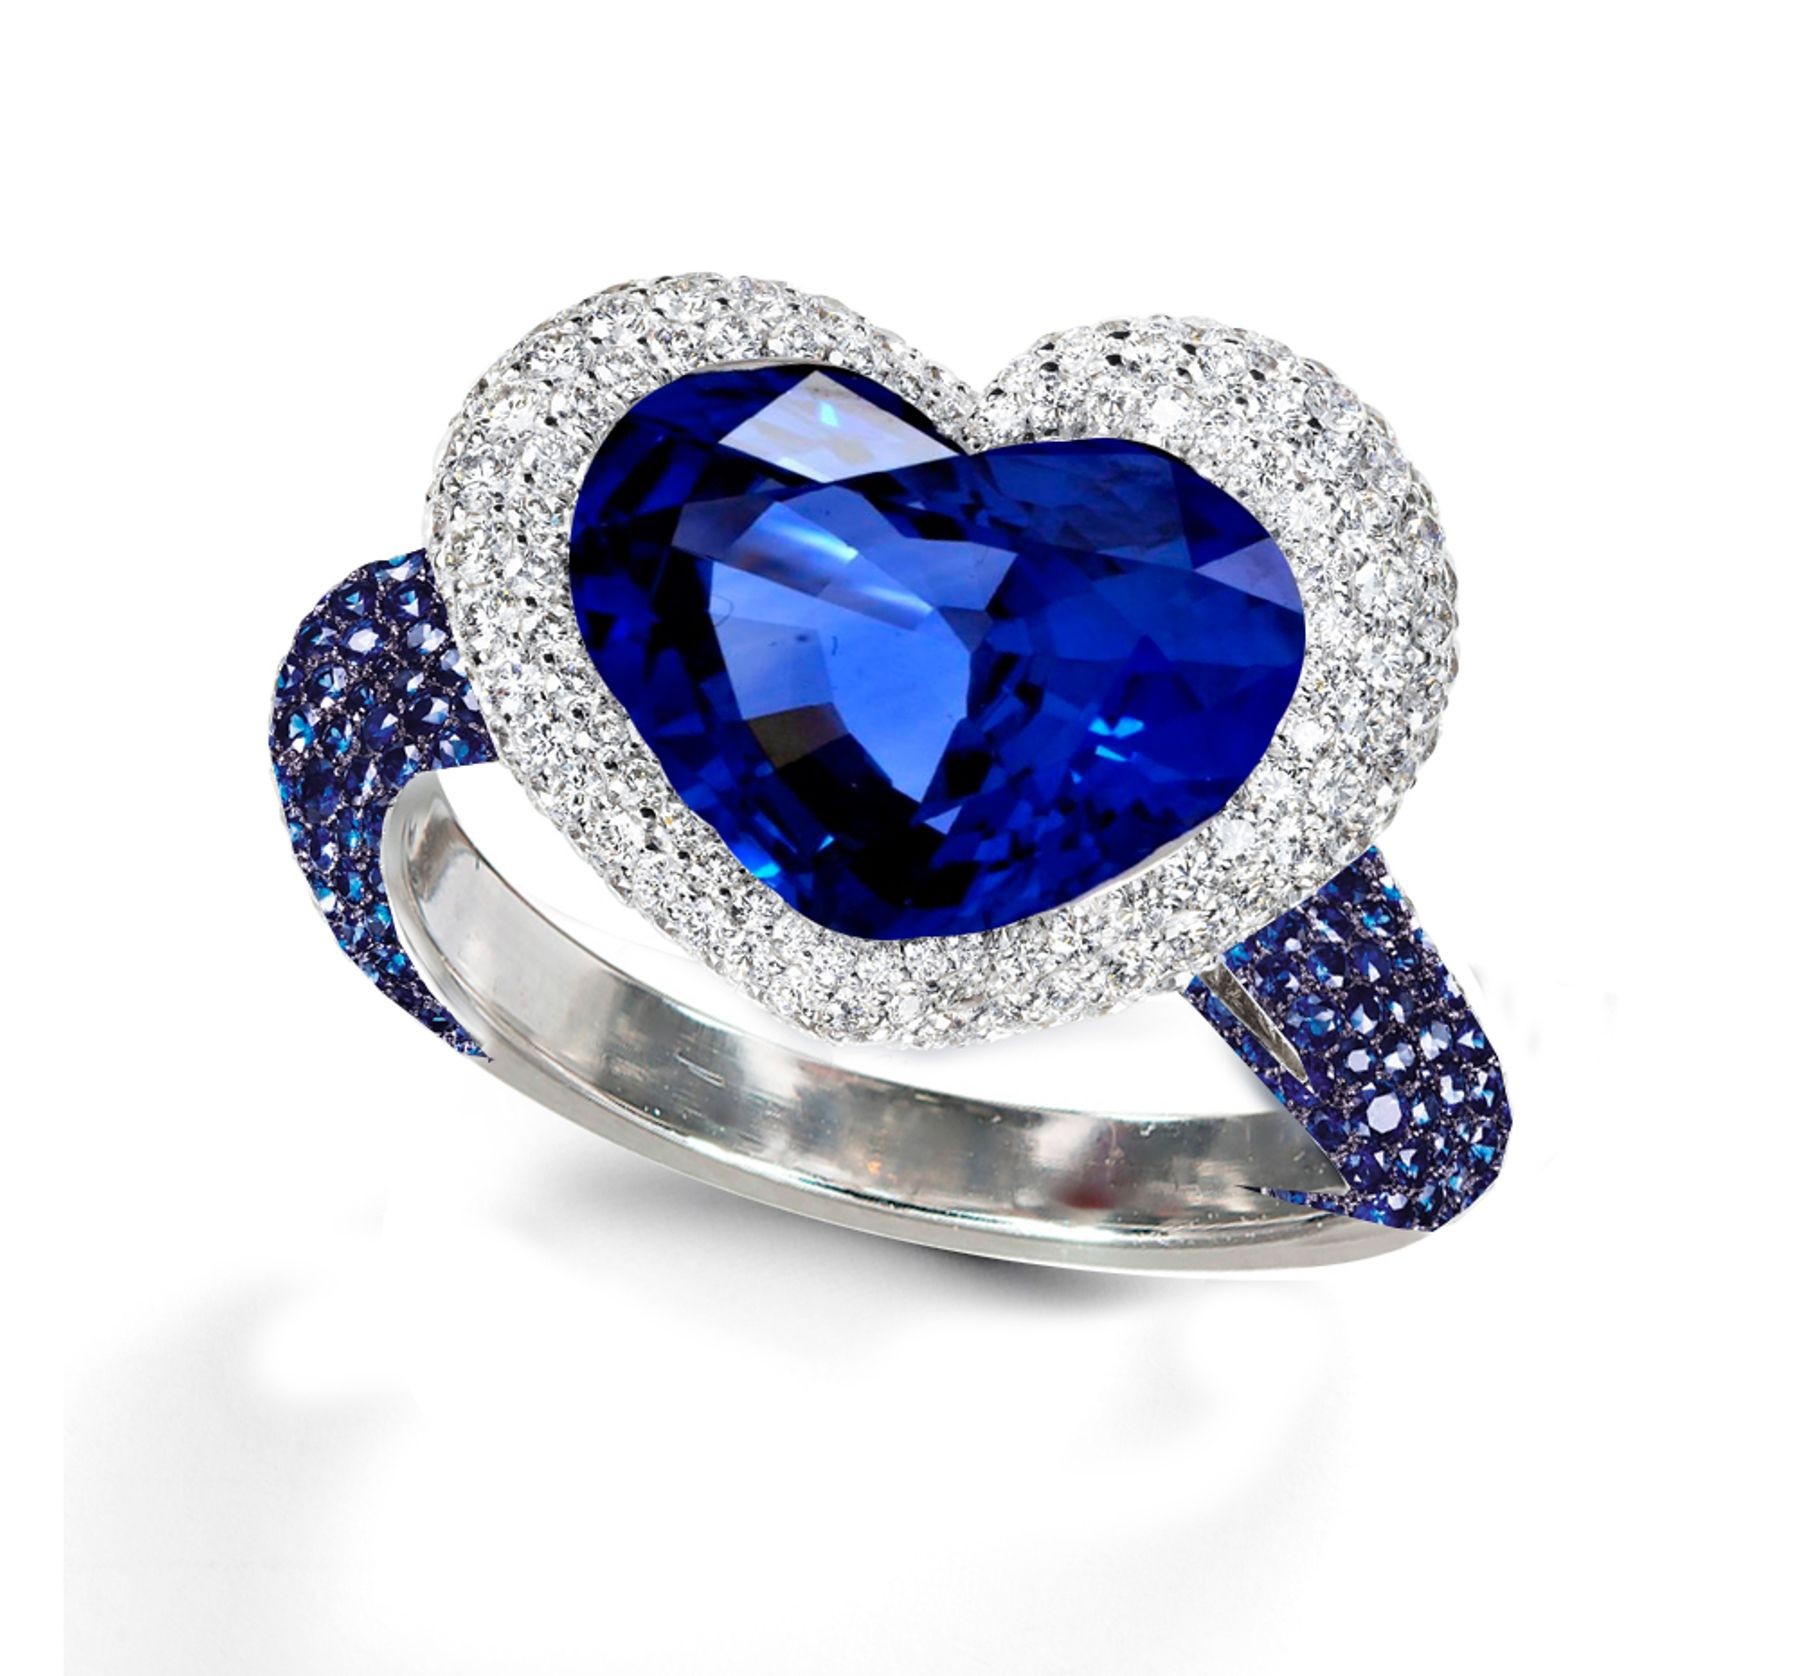 Ring with Heart Blue Sapphire & Pave Set Blue Sapphires & White Diamonds in Gold or Platinum